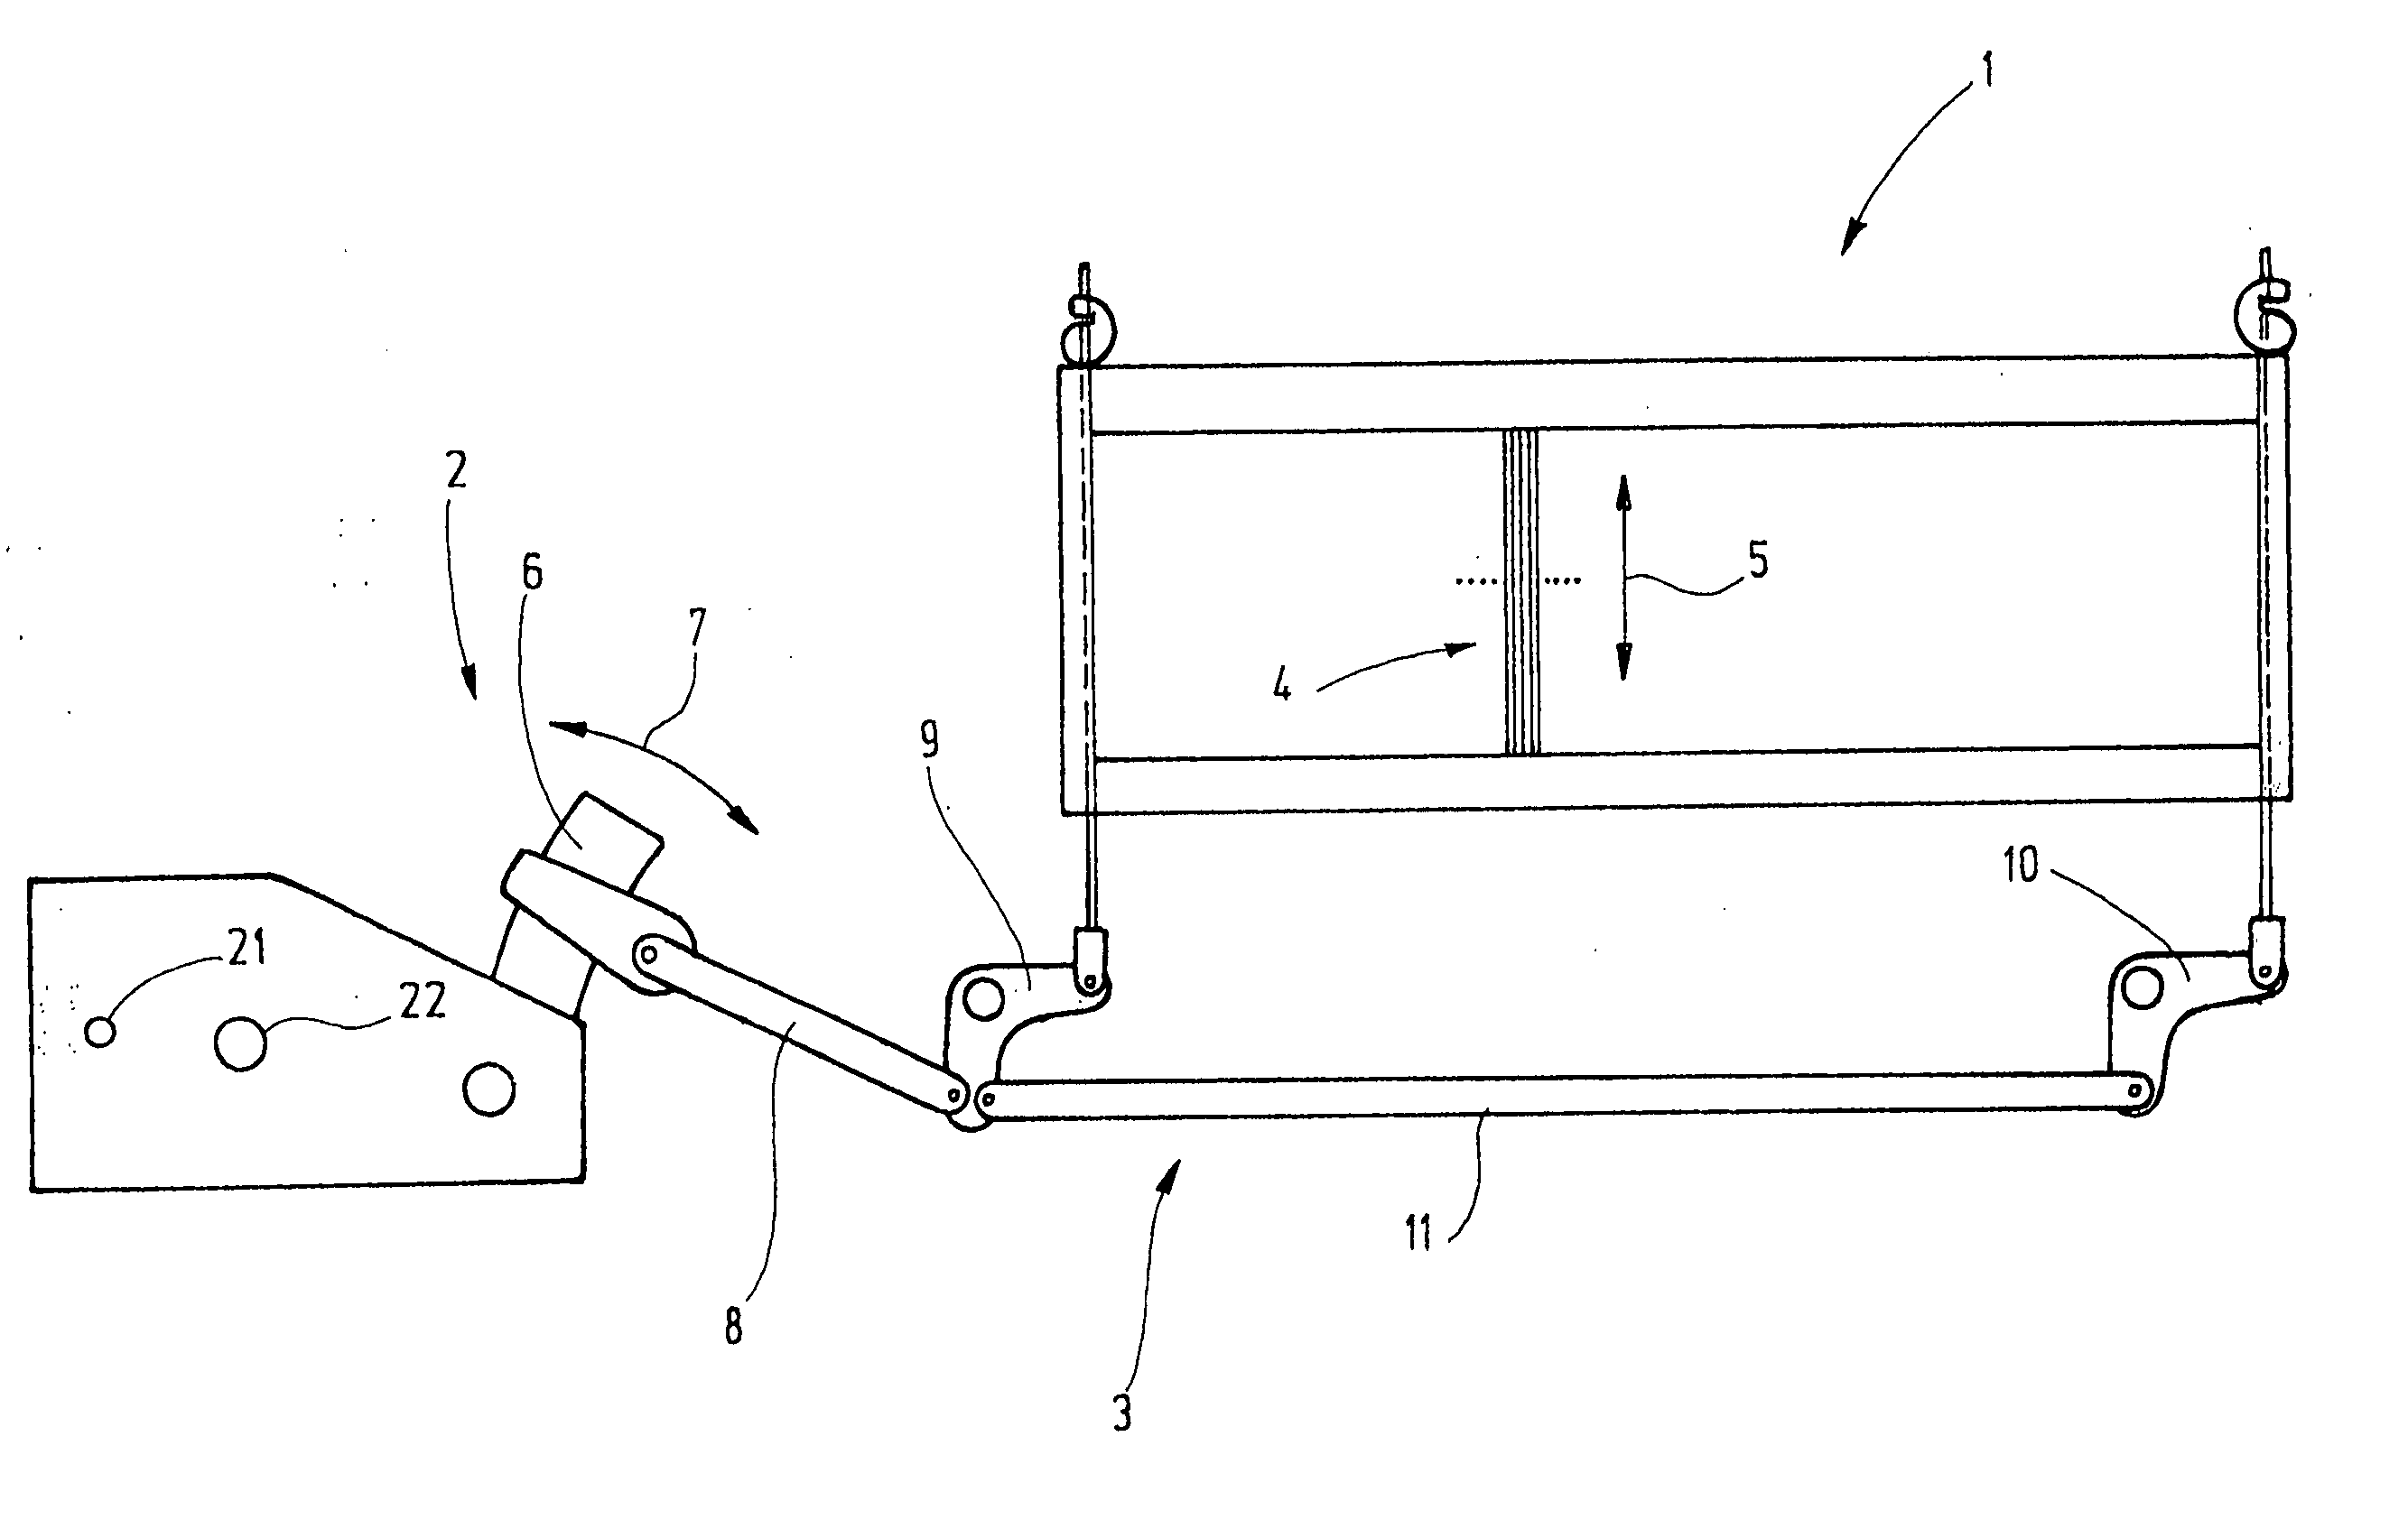 Shaft drive for a power loom